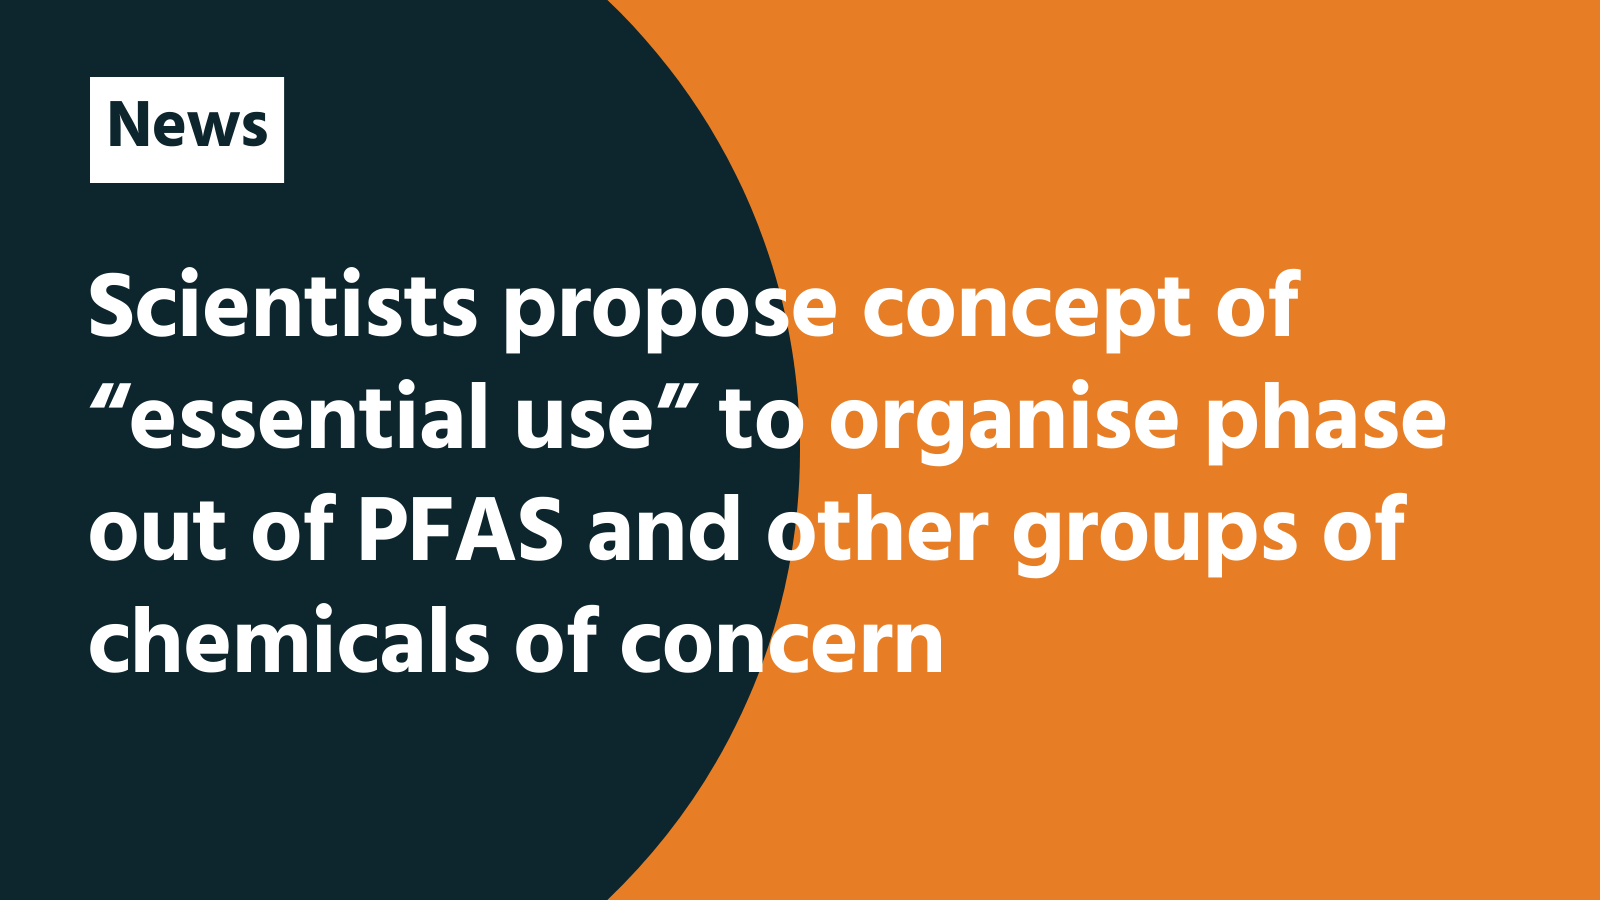 Scientists propose concept of “essential use” to organise phase out of PFAS and other groups of chemicals of concern